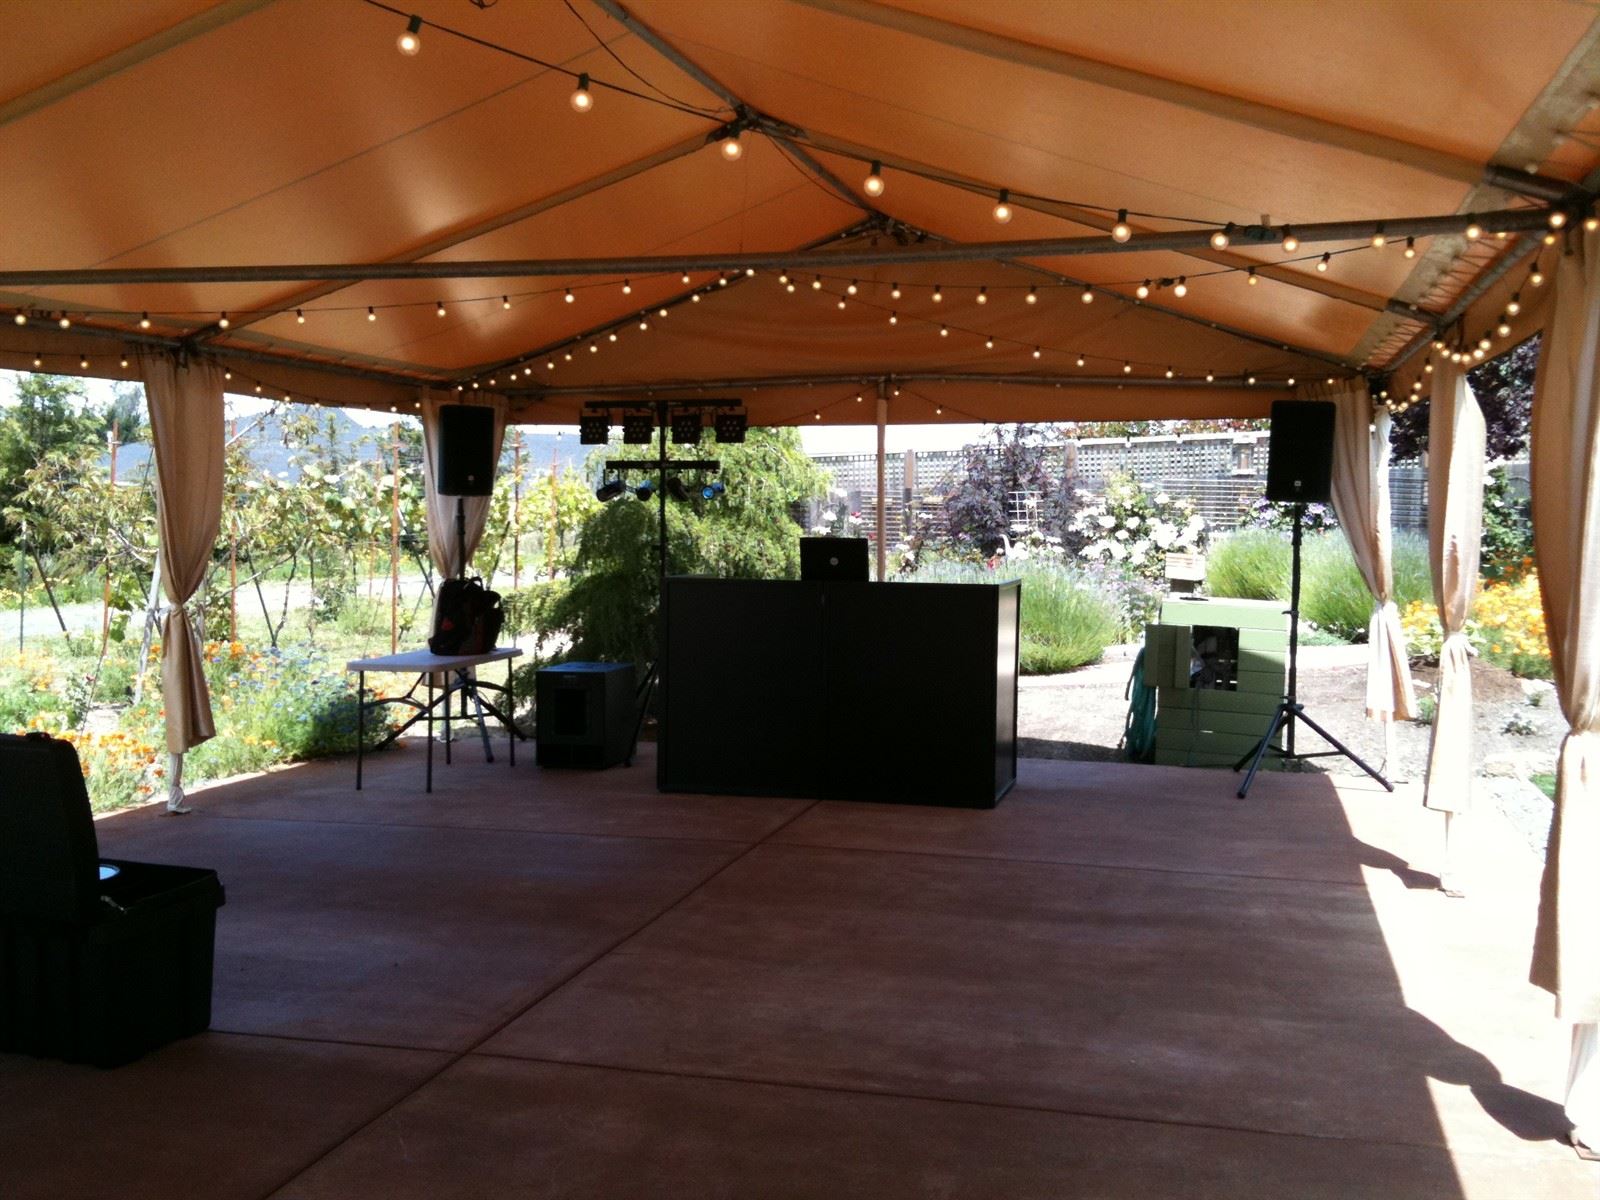 Sova Gardens Wedding - Runaway DJ and Events : The owner of Sova Gardens complimented us on how clean and efficient our set up was! Nice!